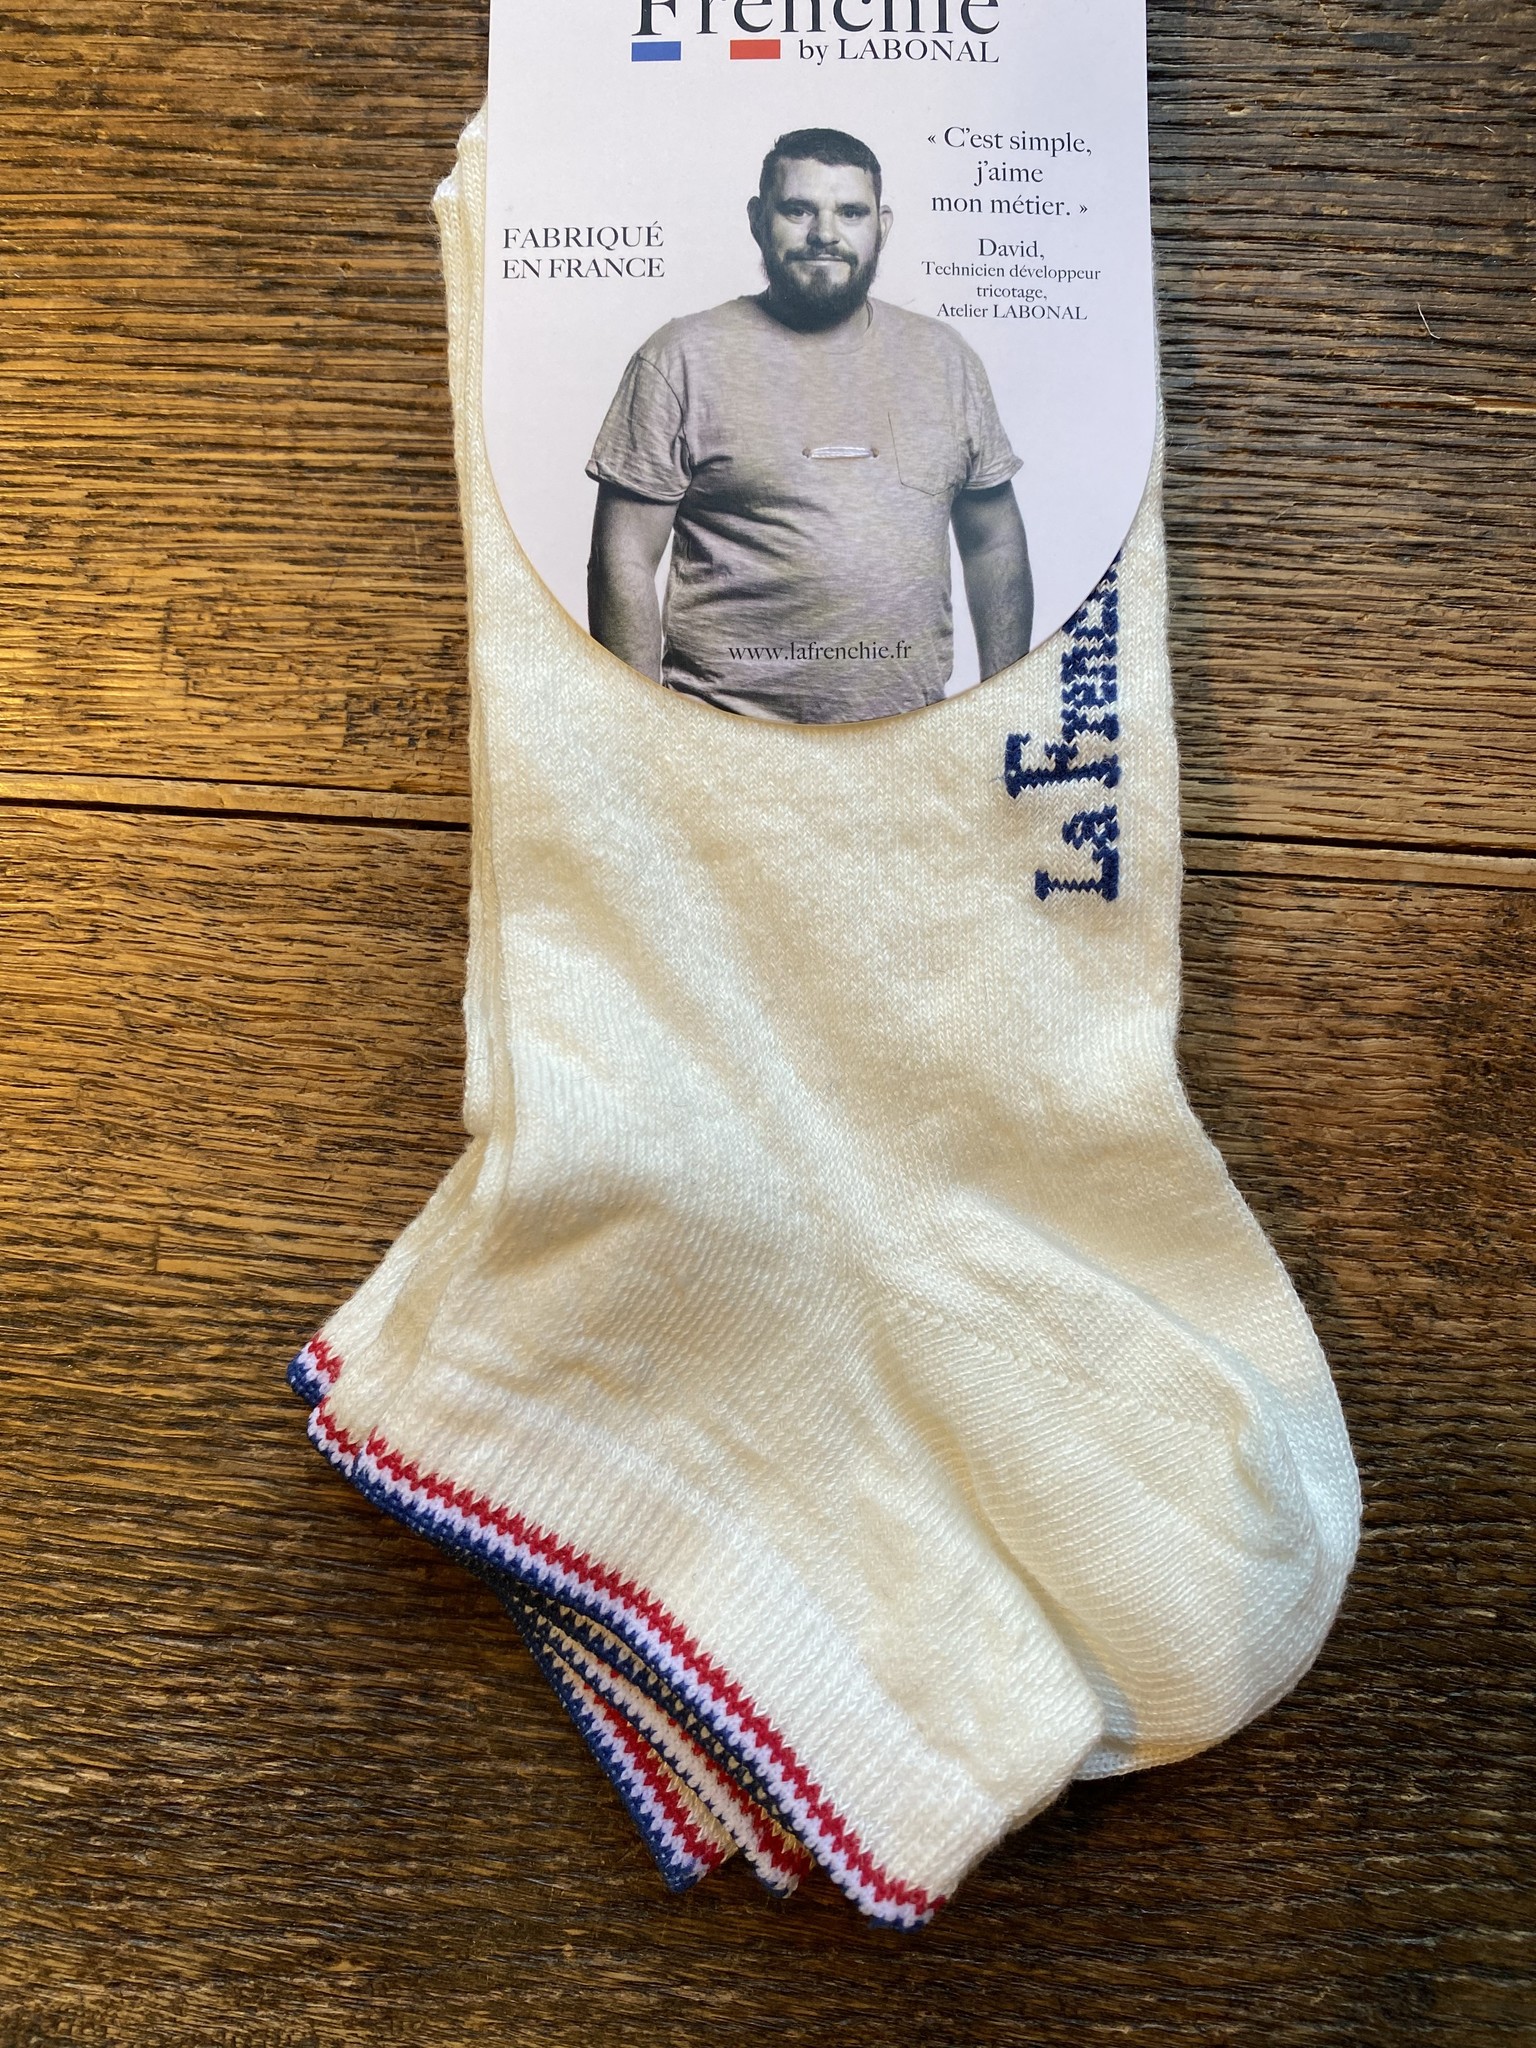 set of 2 pairs of men's low linen socks from la frenchie